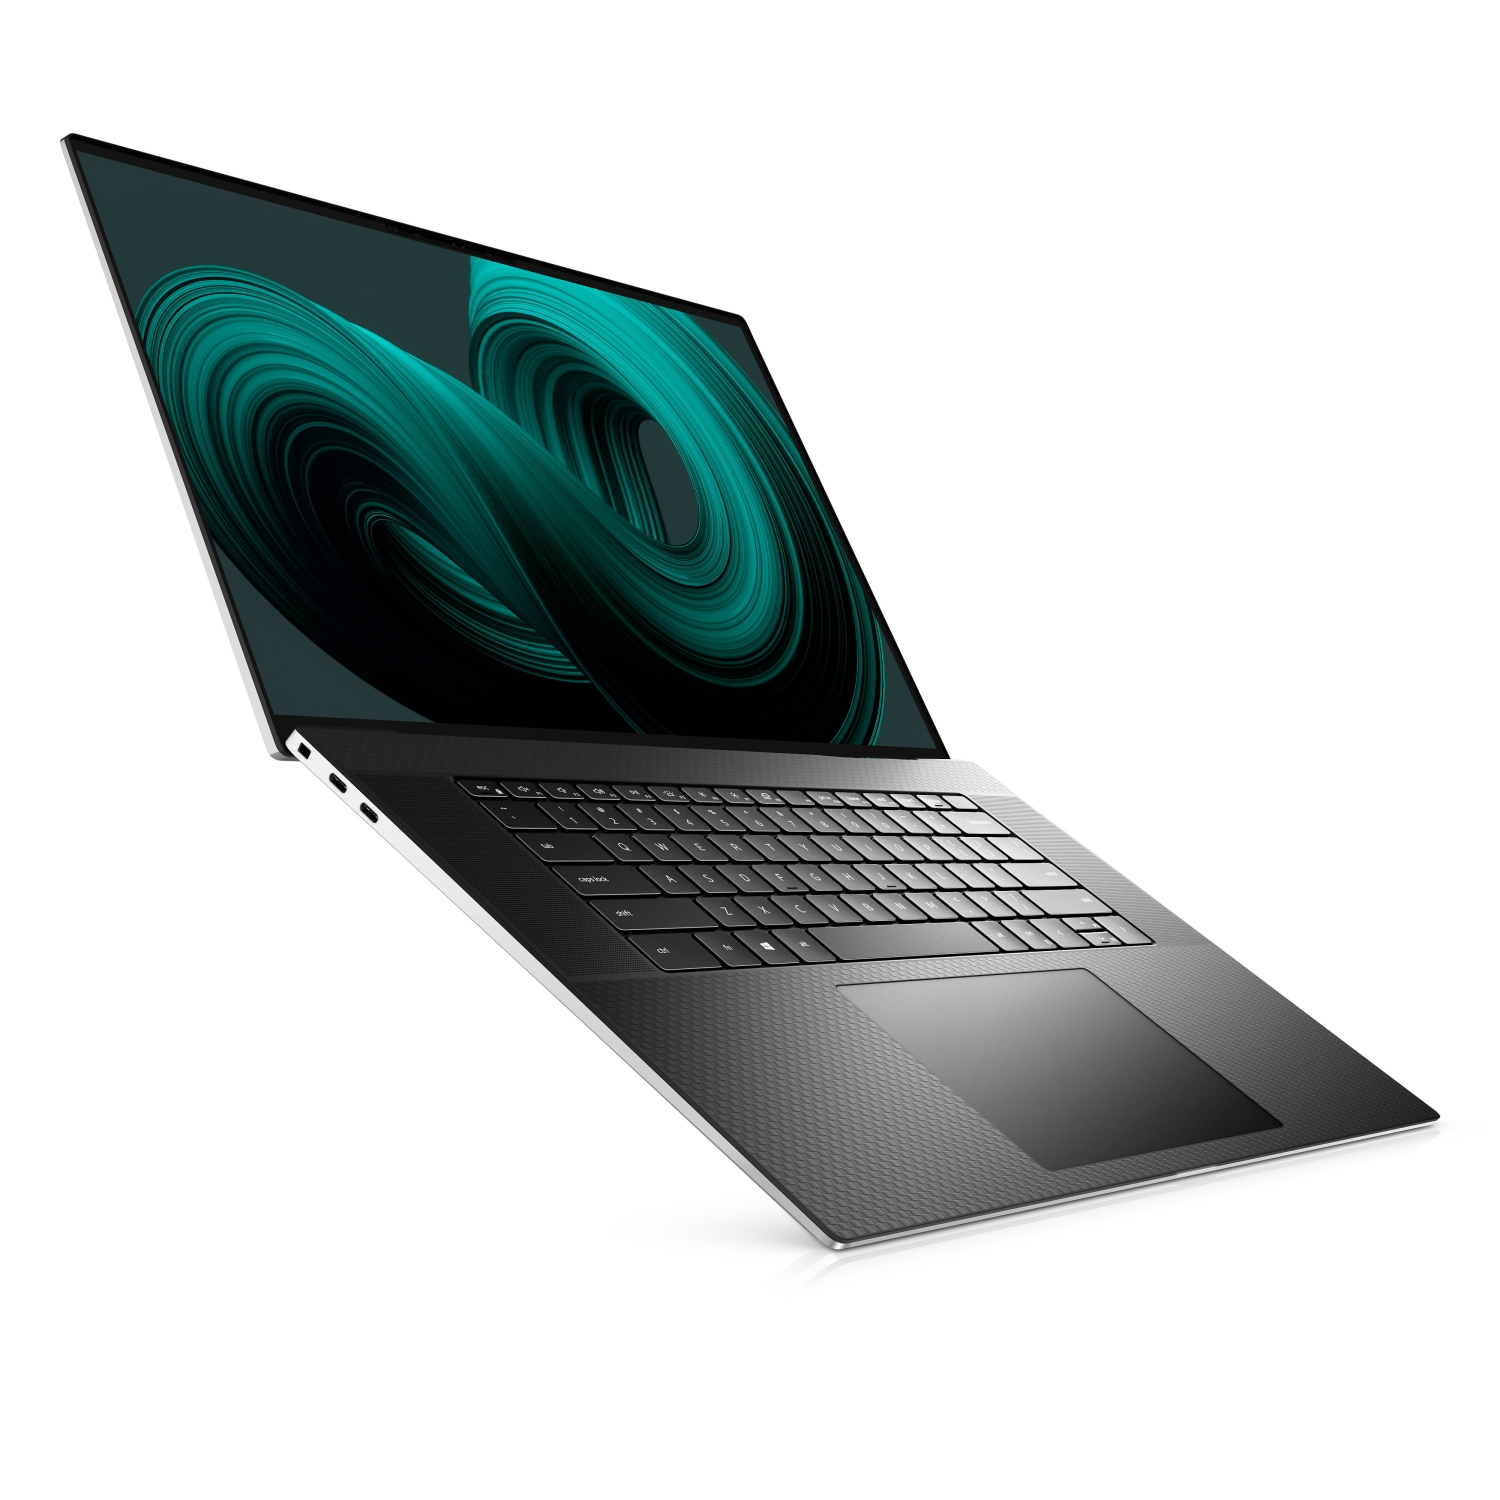 Refurbished (Excellent) - Dell XPS 17 9710 Laptop (2021) | 17" 4K Touch | Core i9 - 512GB SSD - 16GB RAM - RTX 3060 | 8 Cores @ 5 GHz - 11th Gen CPU Certified Refurbished